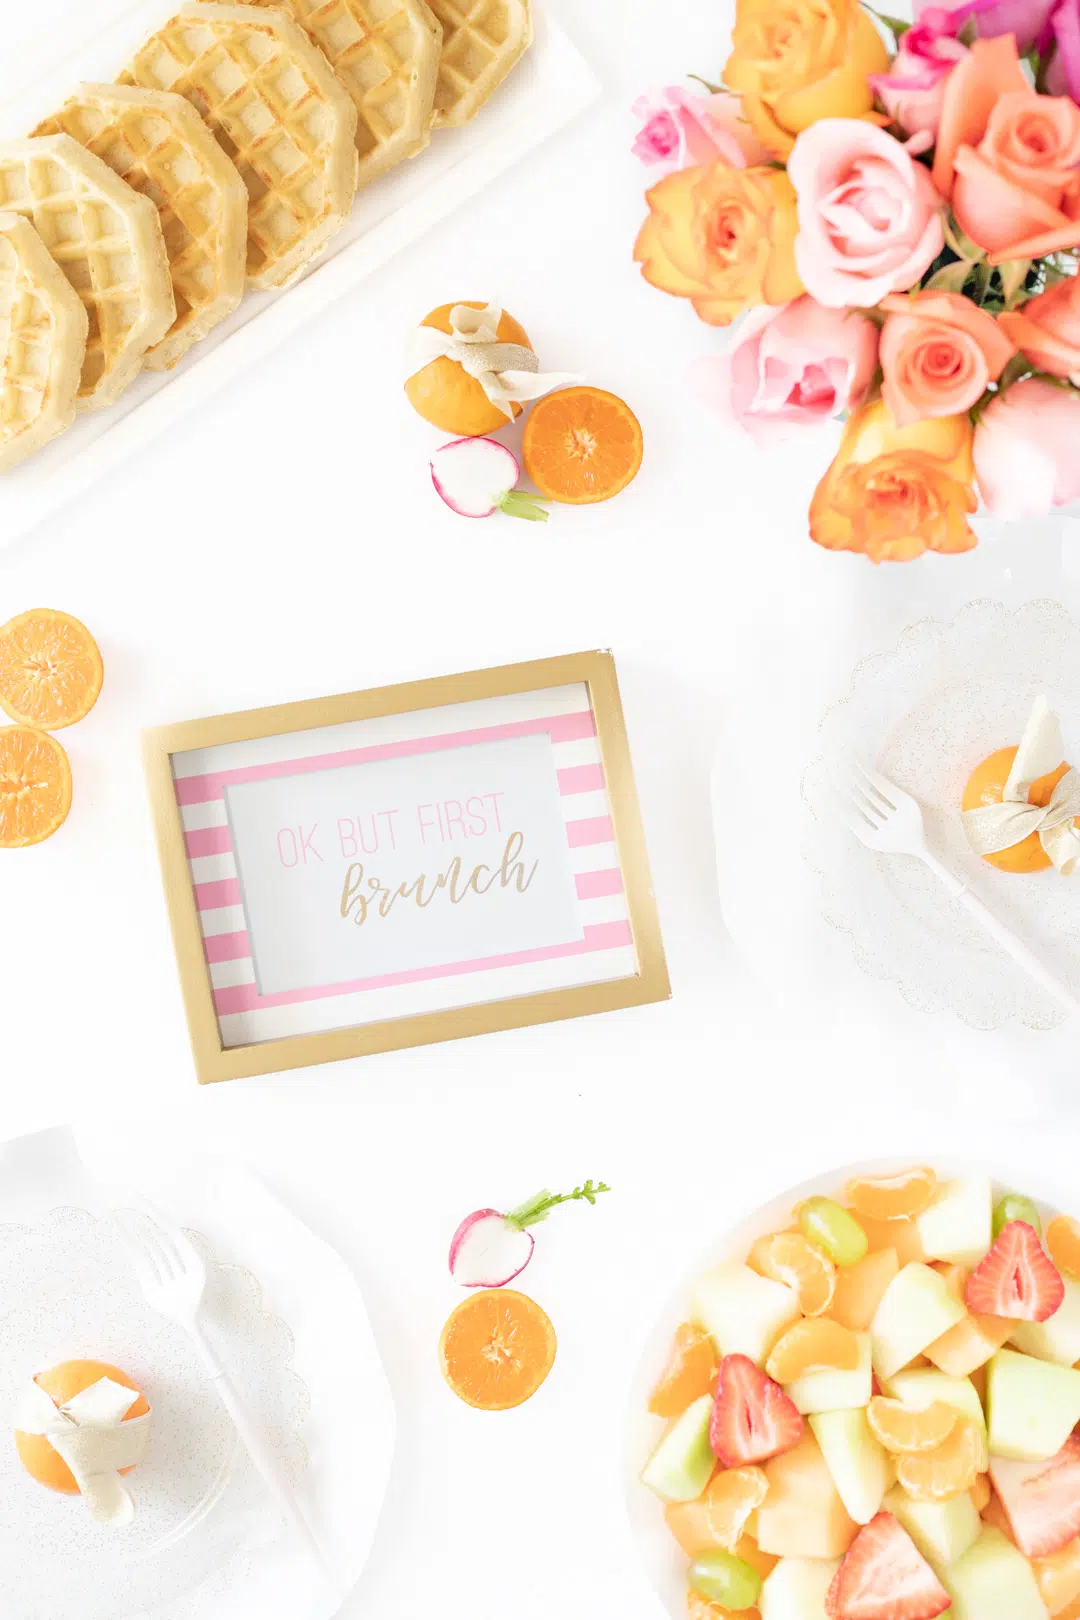 How To Make An Intimate Brunch Buffet - Nookies Diaries